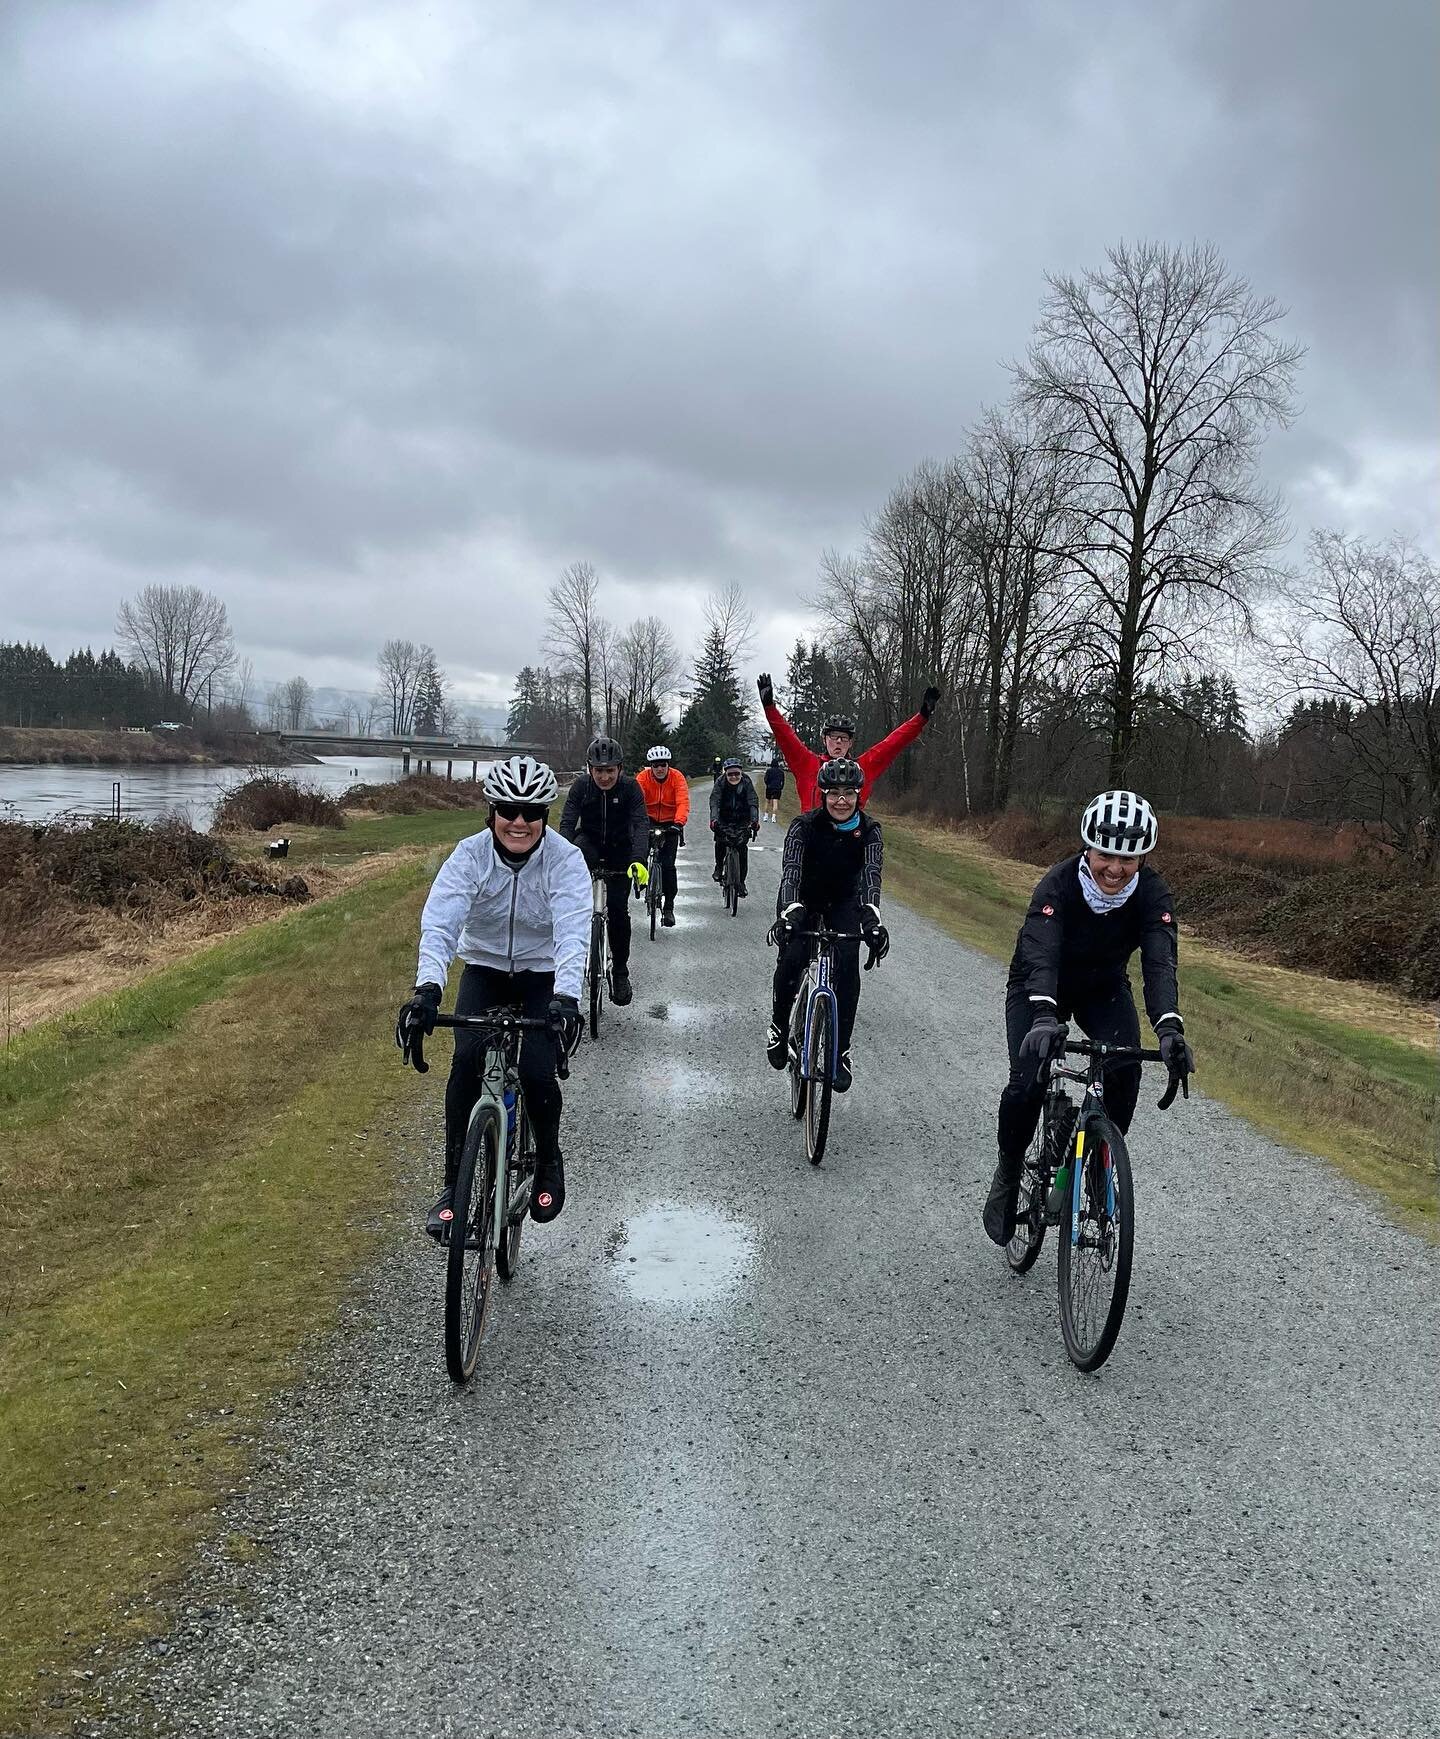 An intrepid LC3 crew on a wet Saturday Pitt River cruise. Some times bad choice have fun consequences! #gravelride #cyclingbc #lakecitycycleclub